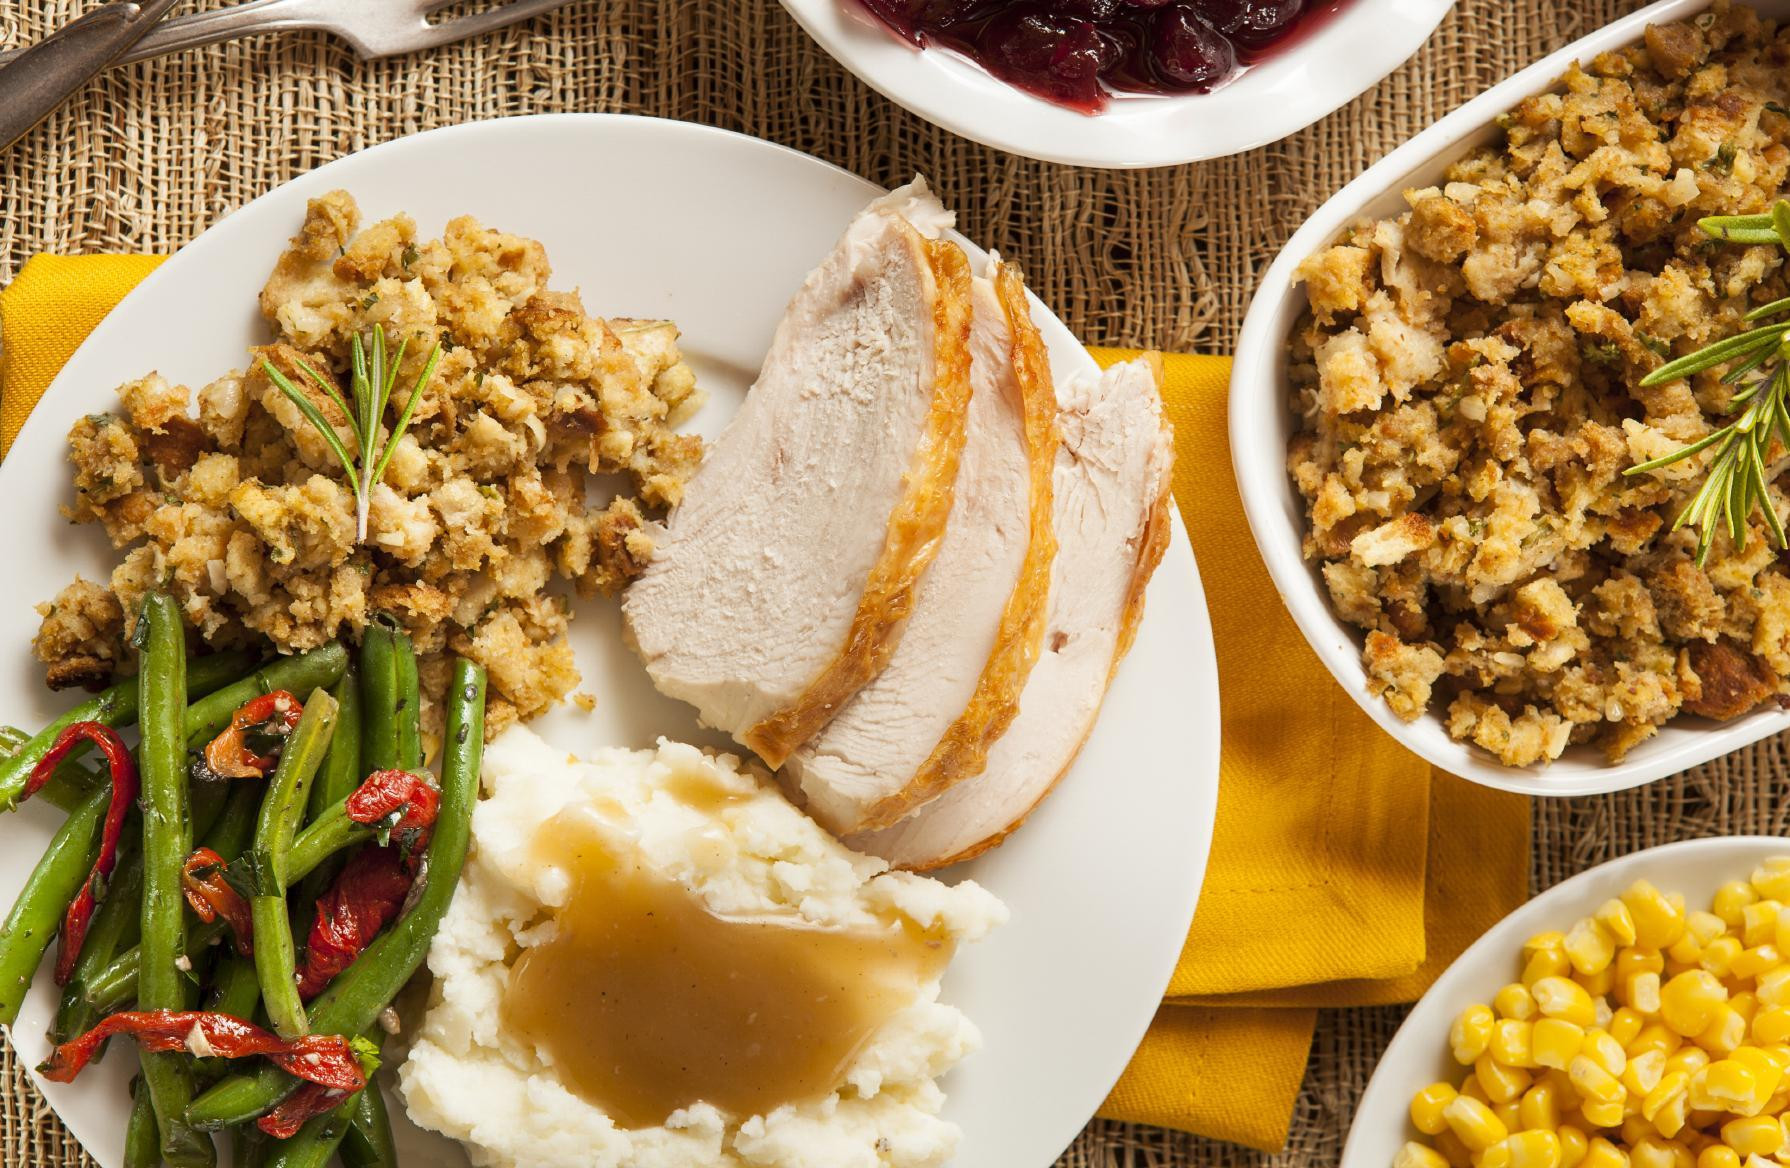 Popular Thanksgiving Side Dishes
 The 12 Most Popular Thanksgiving Side Dishes Ranked